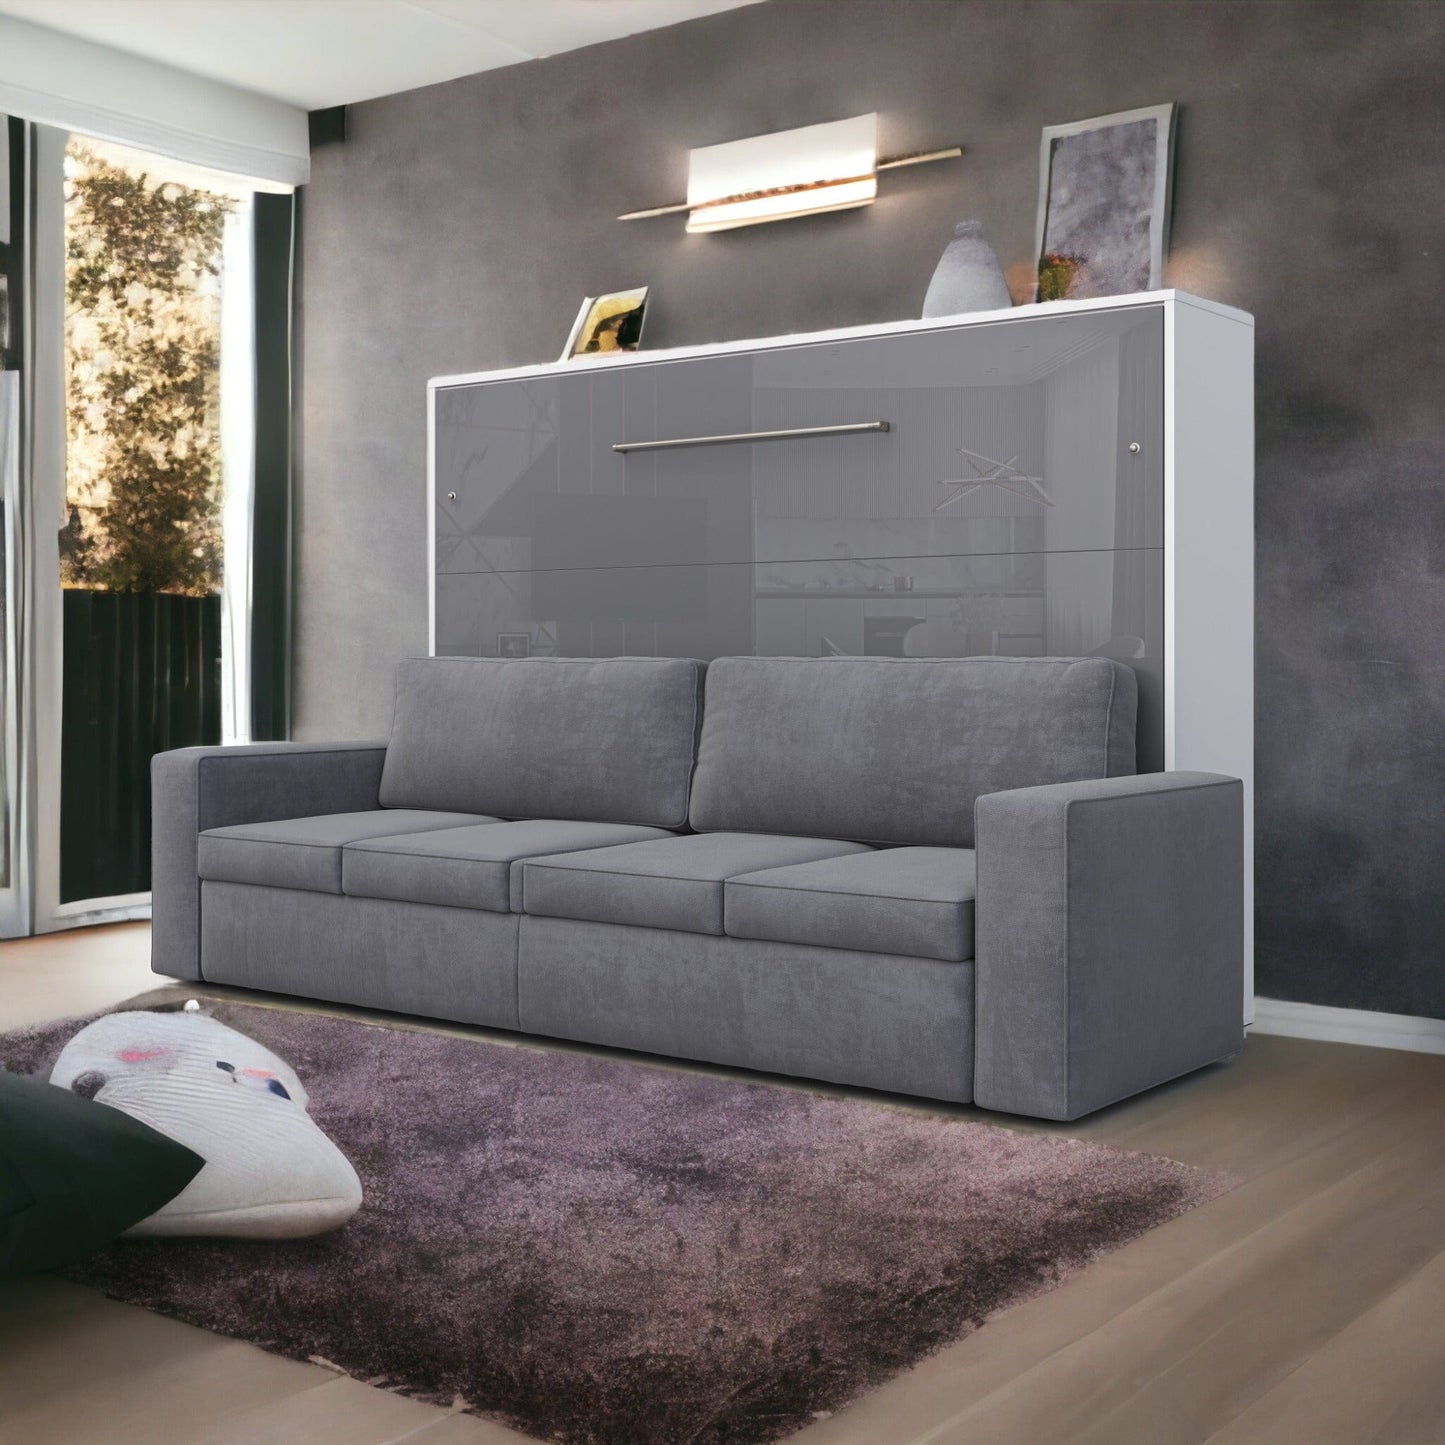 Maxima House Horizontal Murphy bed INVENTO with a Sofa, European Queen IN015WG-G